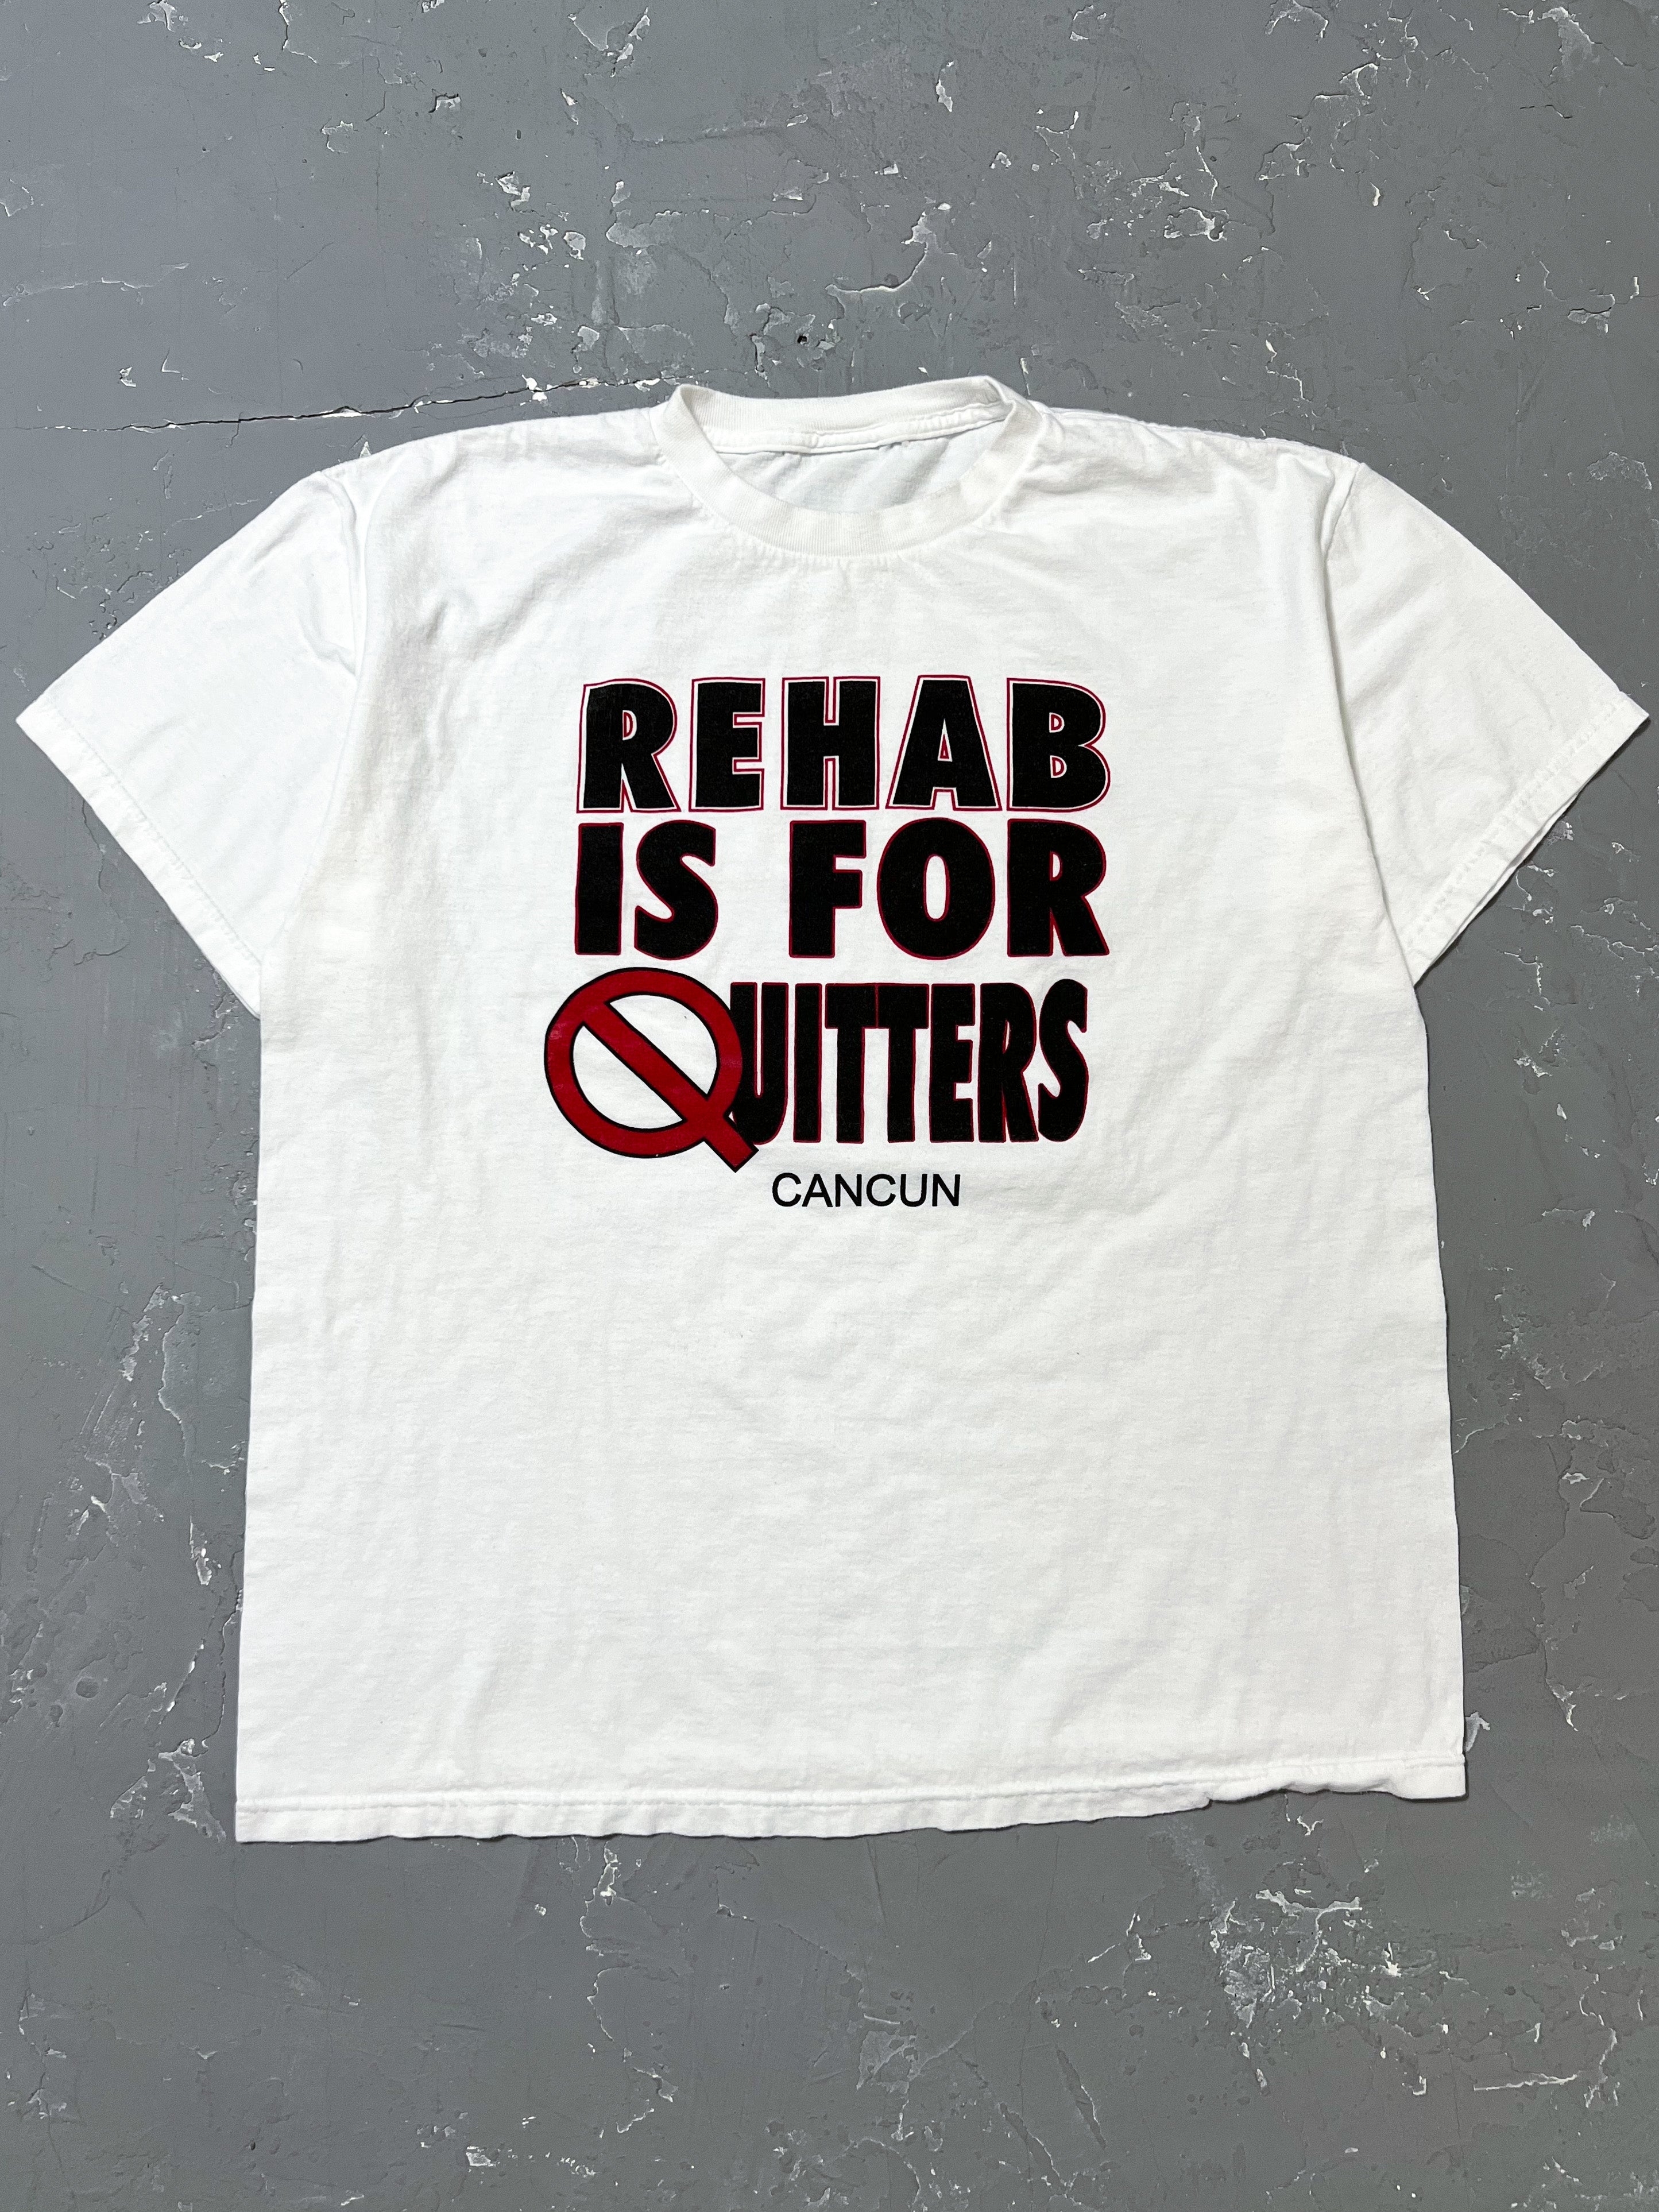 2000s “Rehab is for Quitters” Tee [XL]